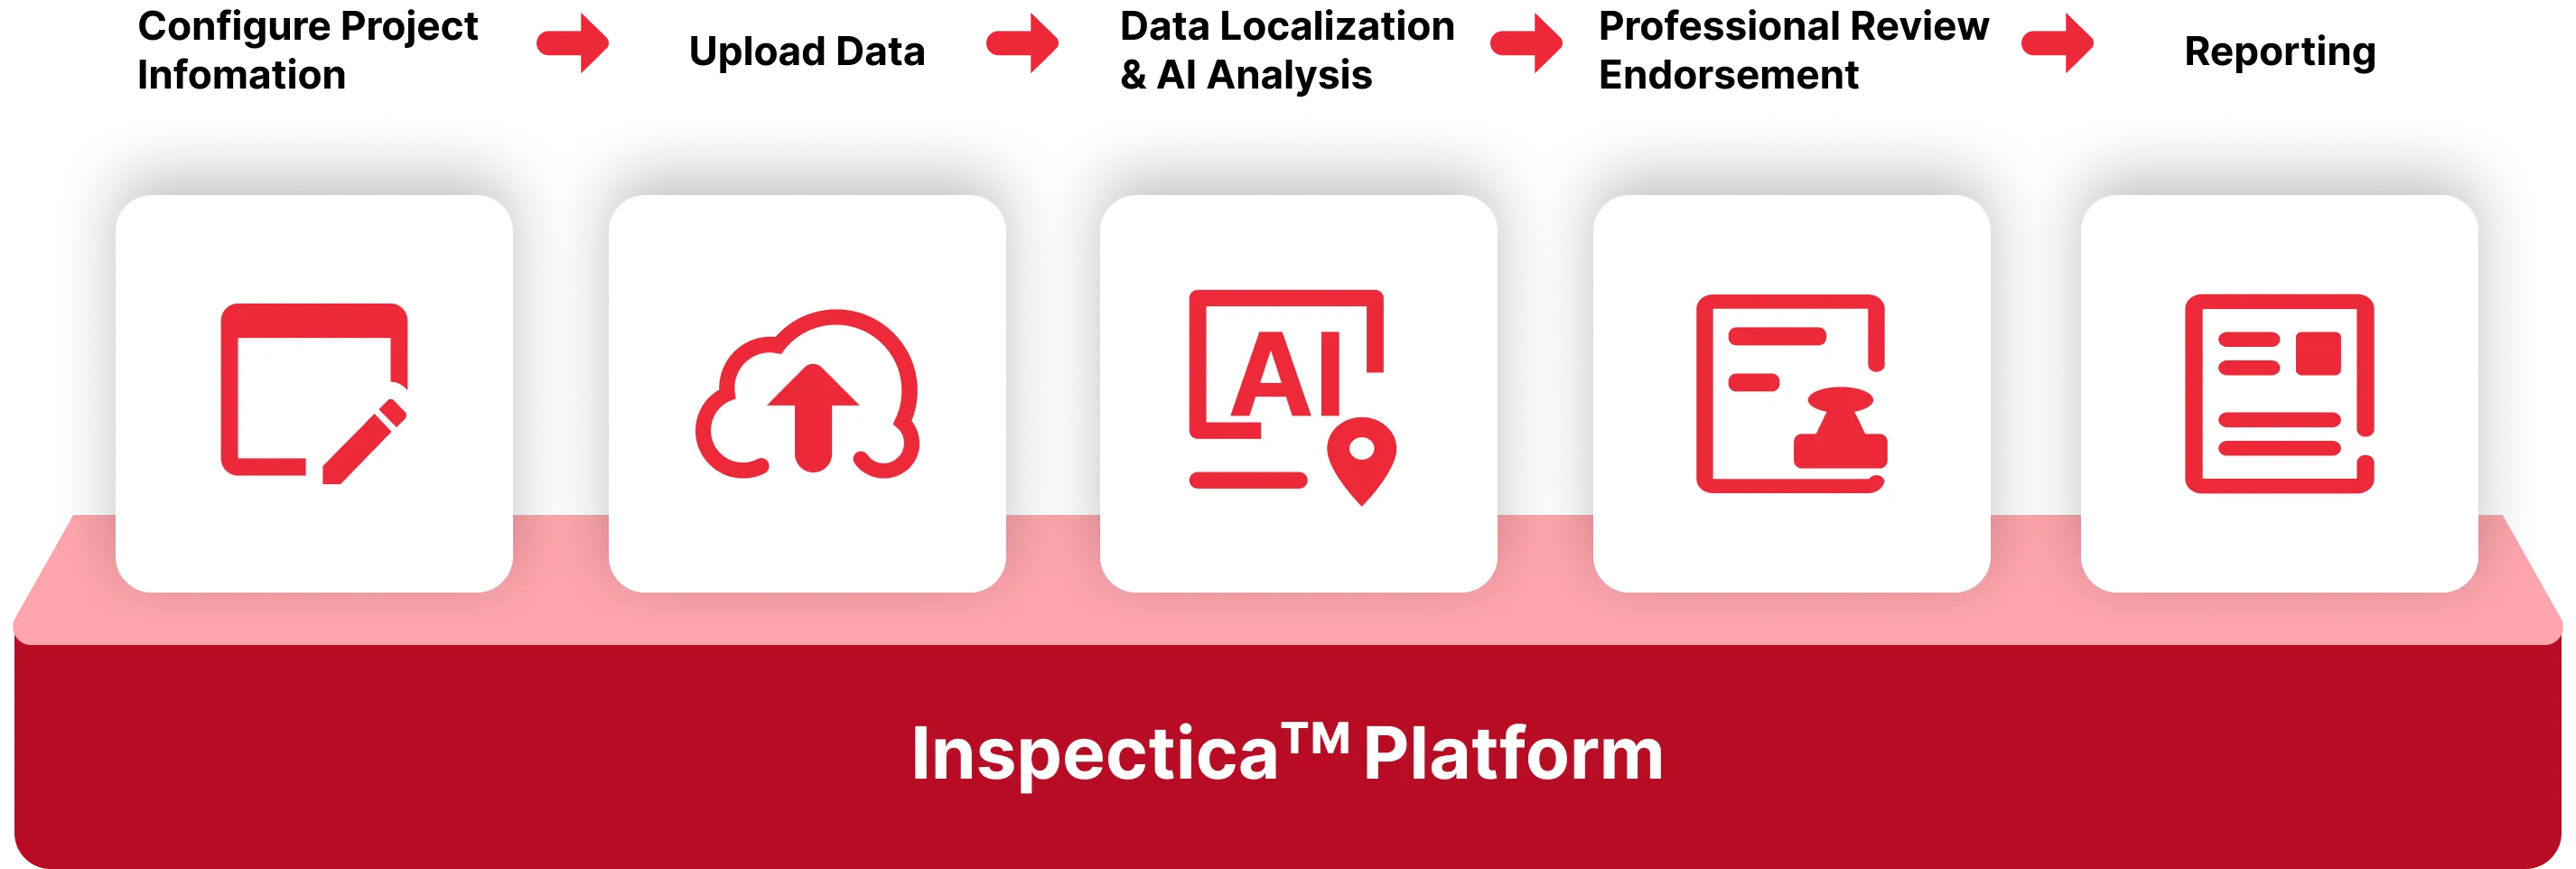 Features of RaSpects Inspectica 2.0: SaaS Platofrm for Building Inspection Software